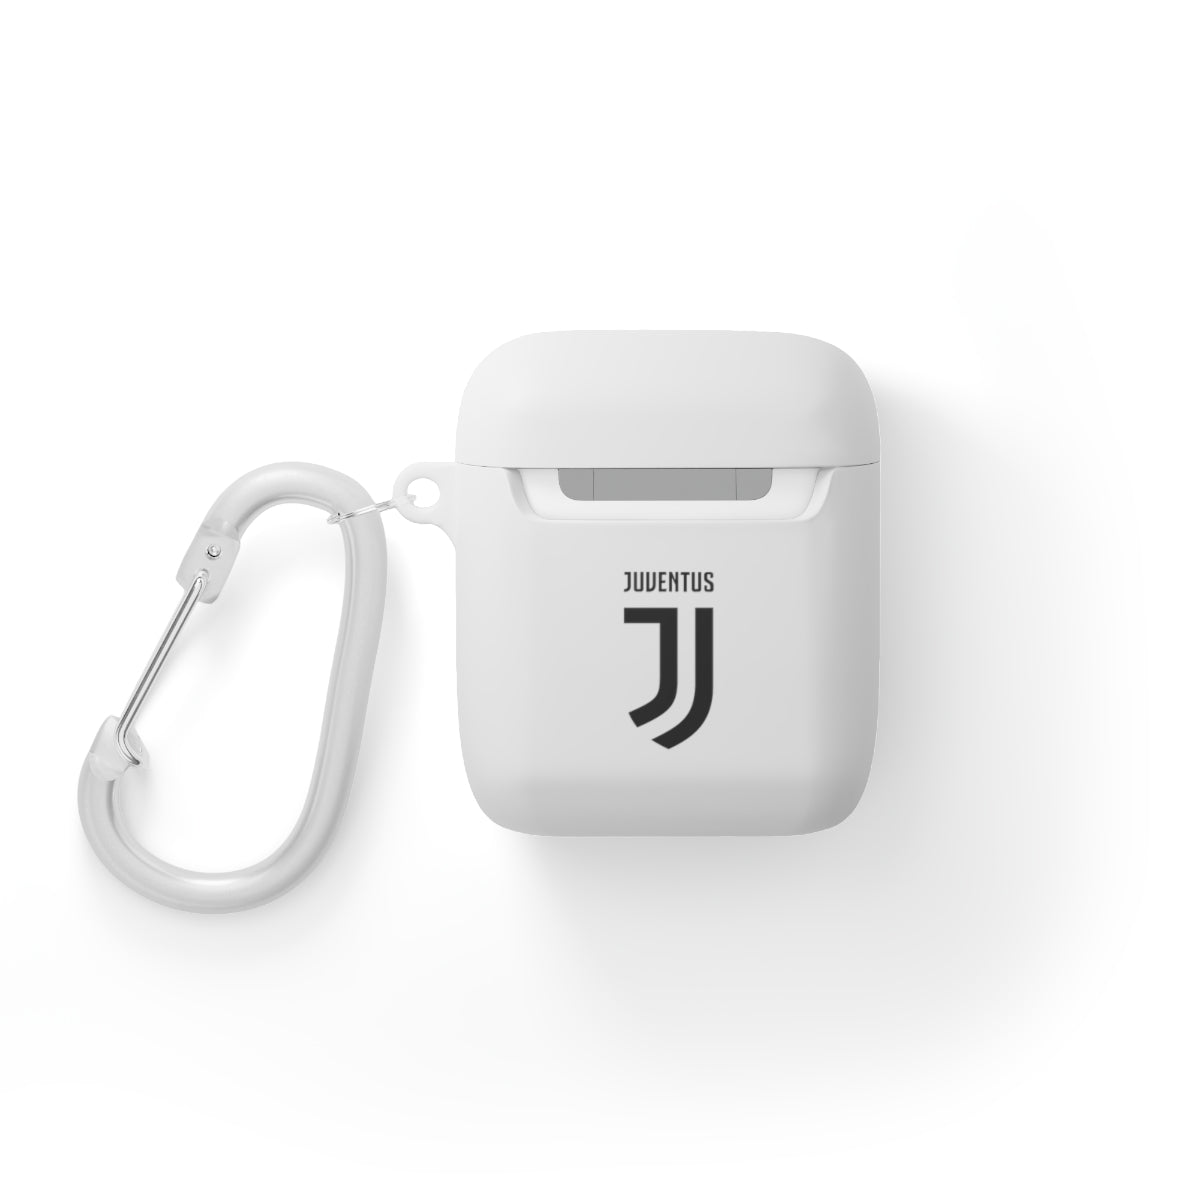 Juventus AirPods and AirPods Pro Case Cover